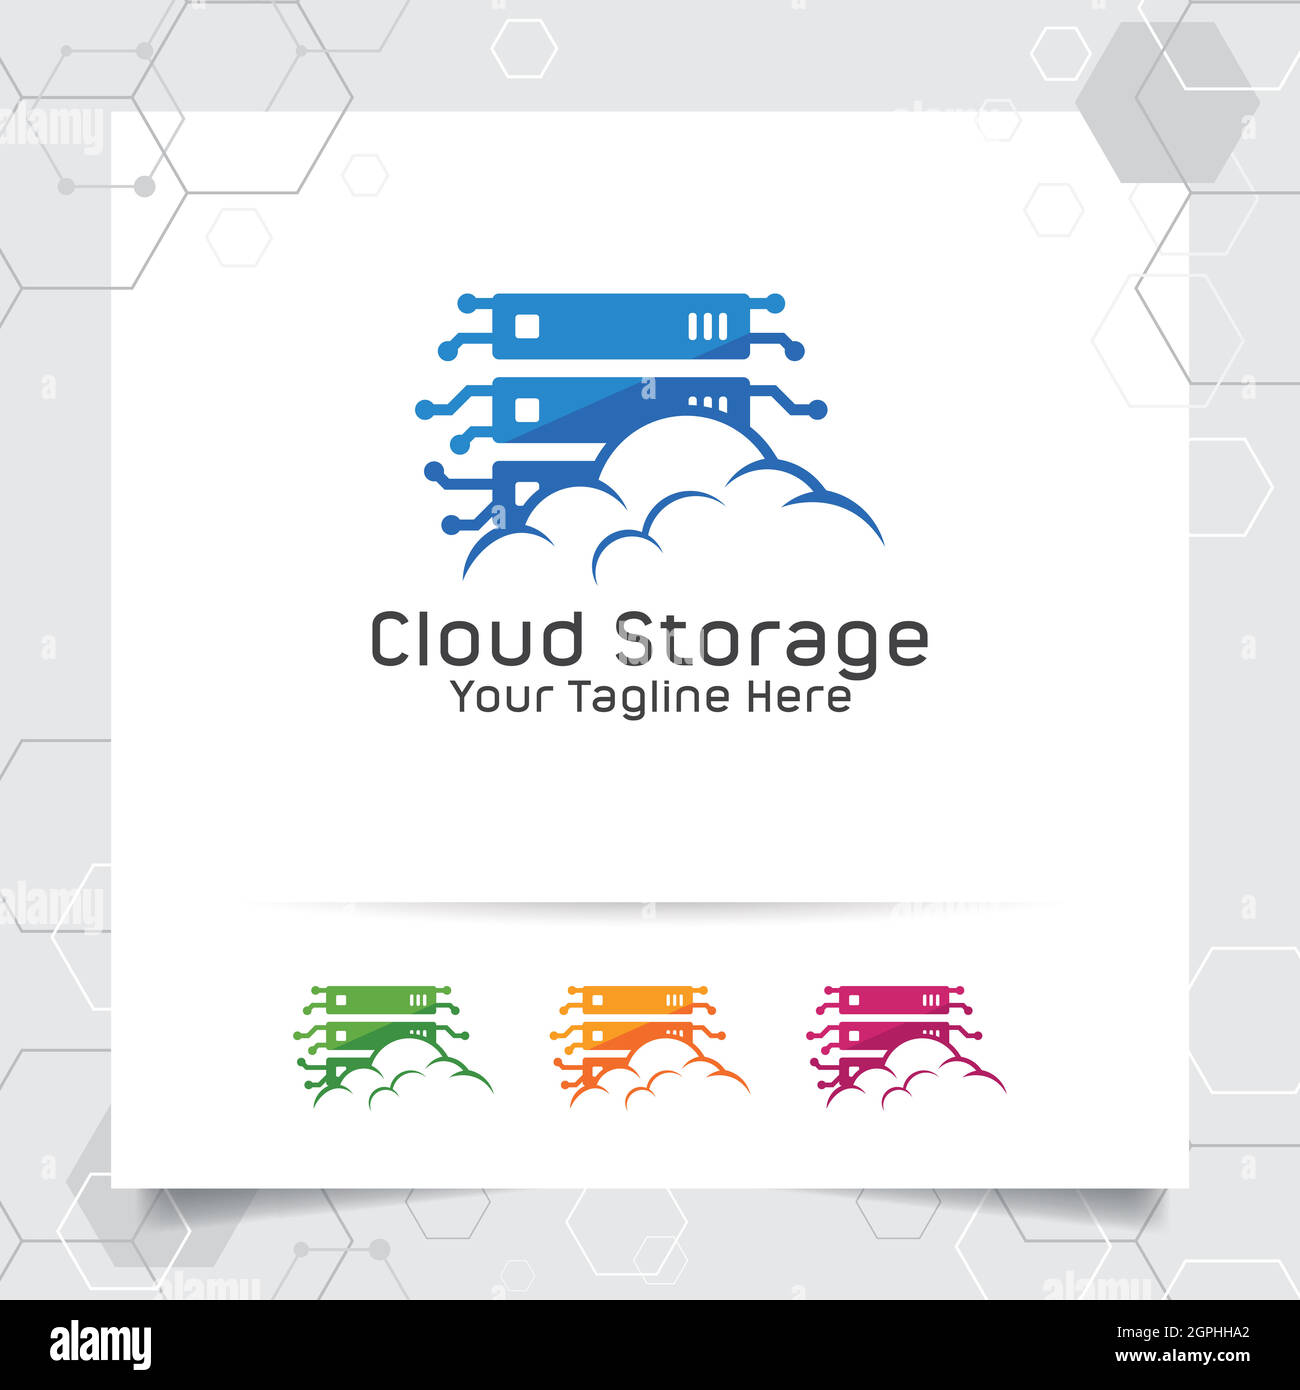 Cloud hosting logo vector design with concept of server and cloud icon illustration for hosting provider, server rack, and sharing storage. Stock Vector